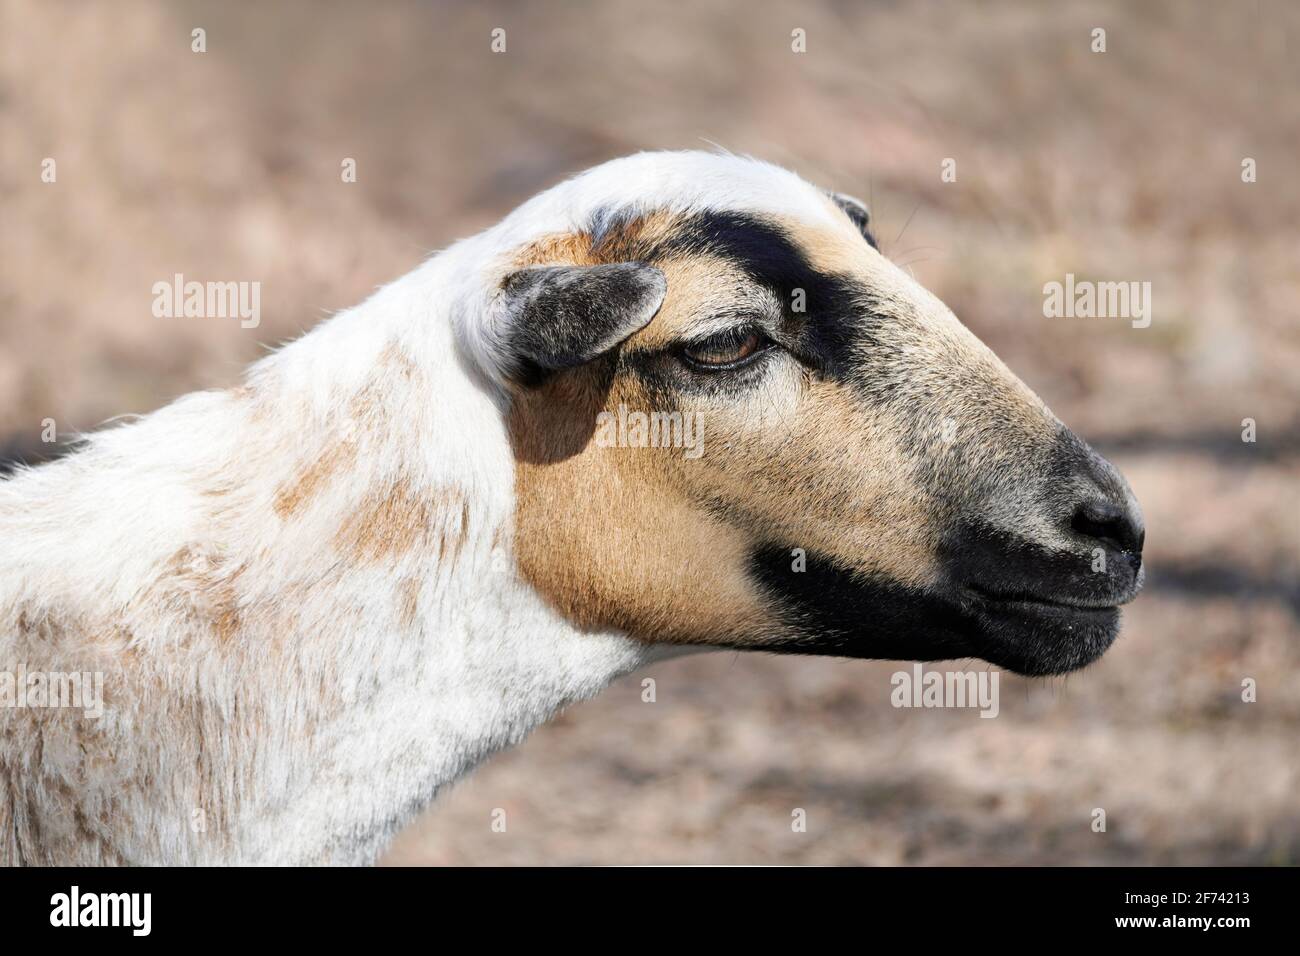 Side close-up of a sheep with brown and white fur. Mammal. Stock Photo